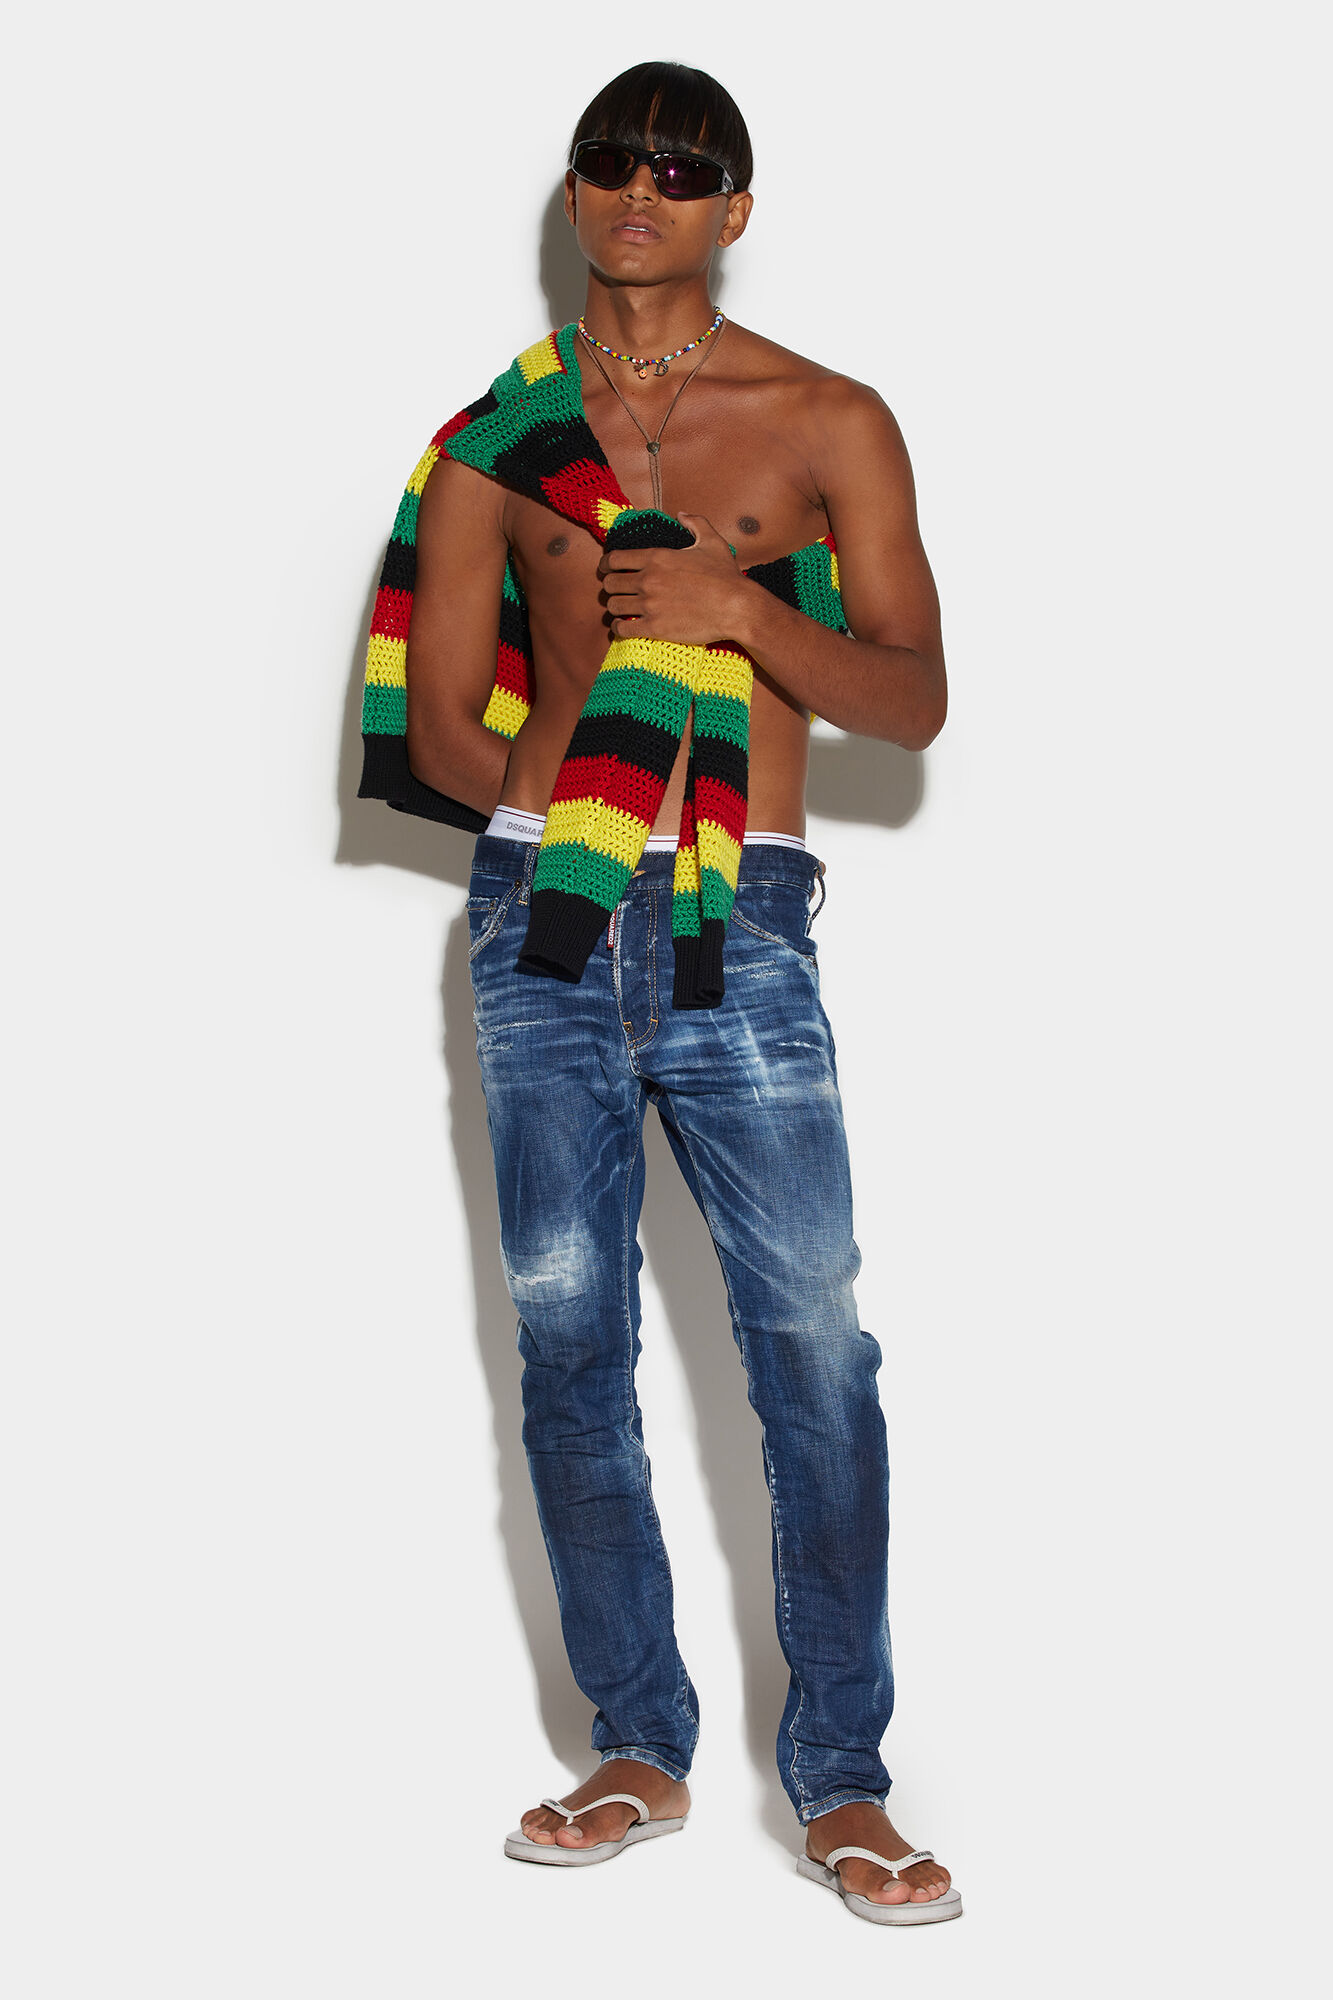 Fashionable African Man in Jeans Clothes Stock Photo - Image of model,  black: 172148306